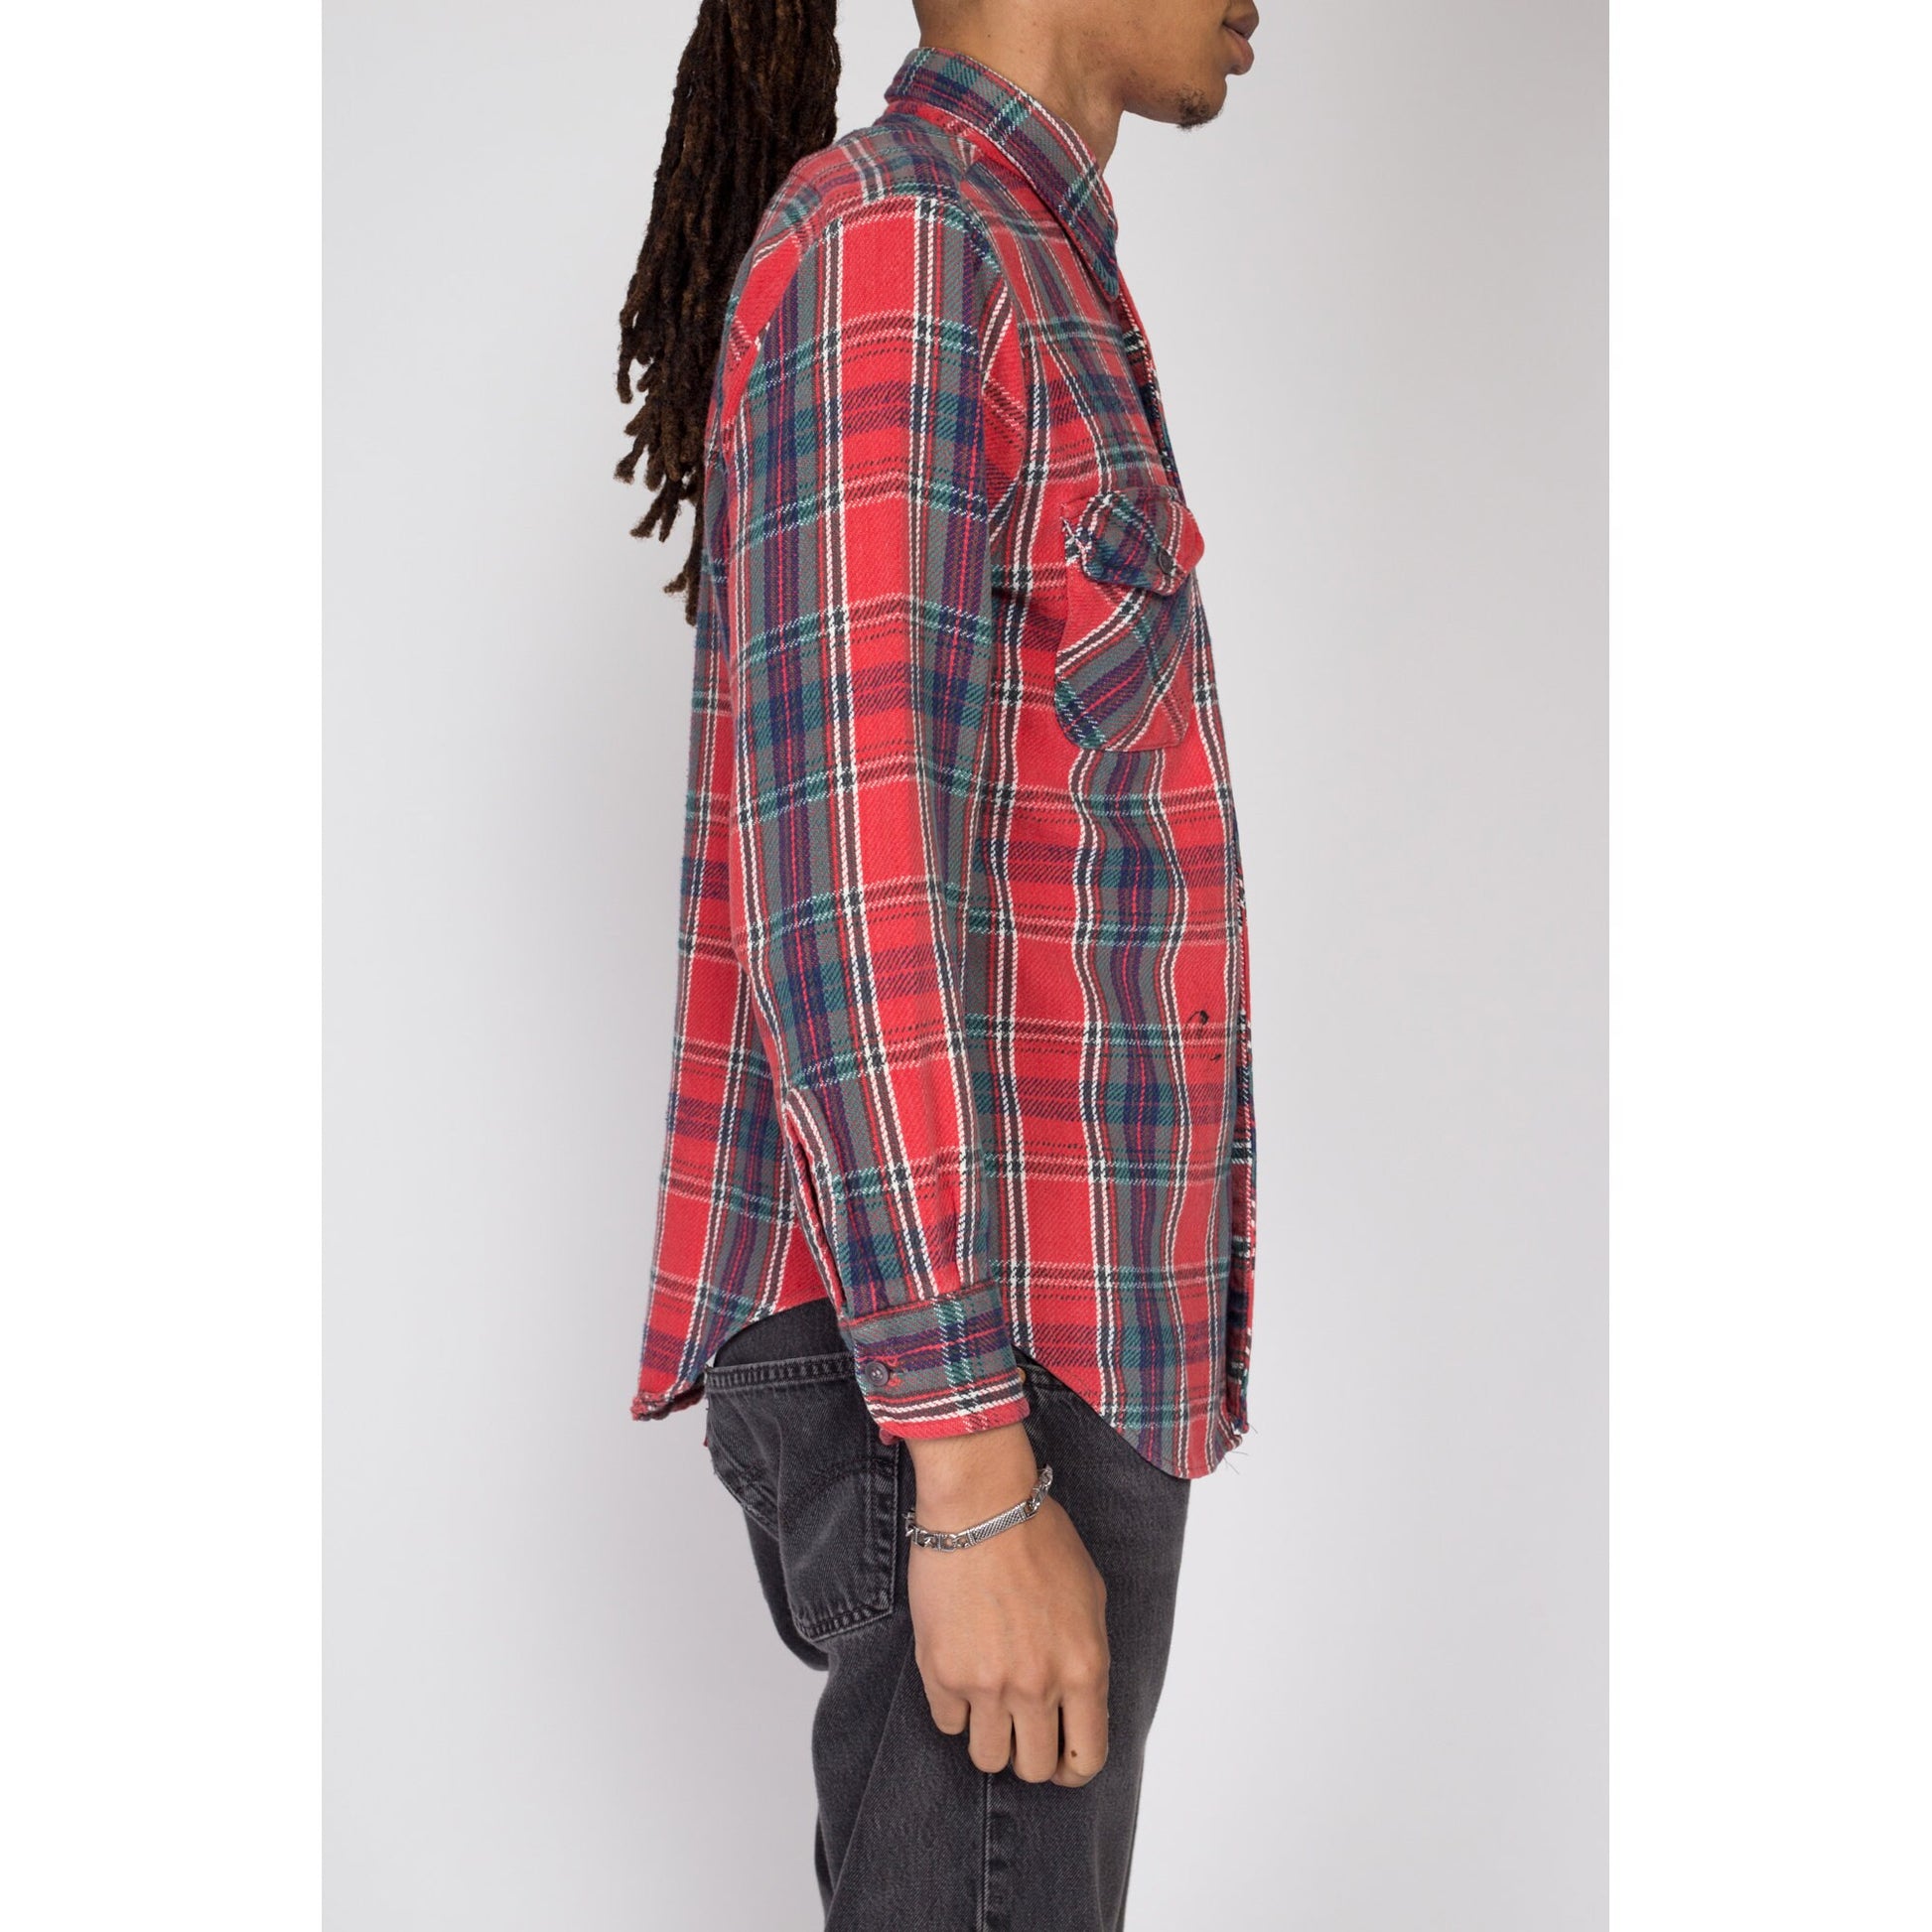 Medium 80s Kingsport Red Plaid Flannel Shirt l | Vintage Grunge Button Up Long Sleeve Collared Top